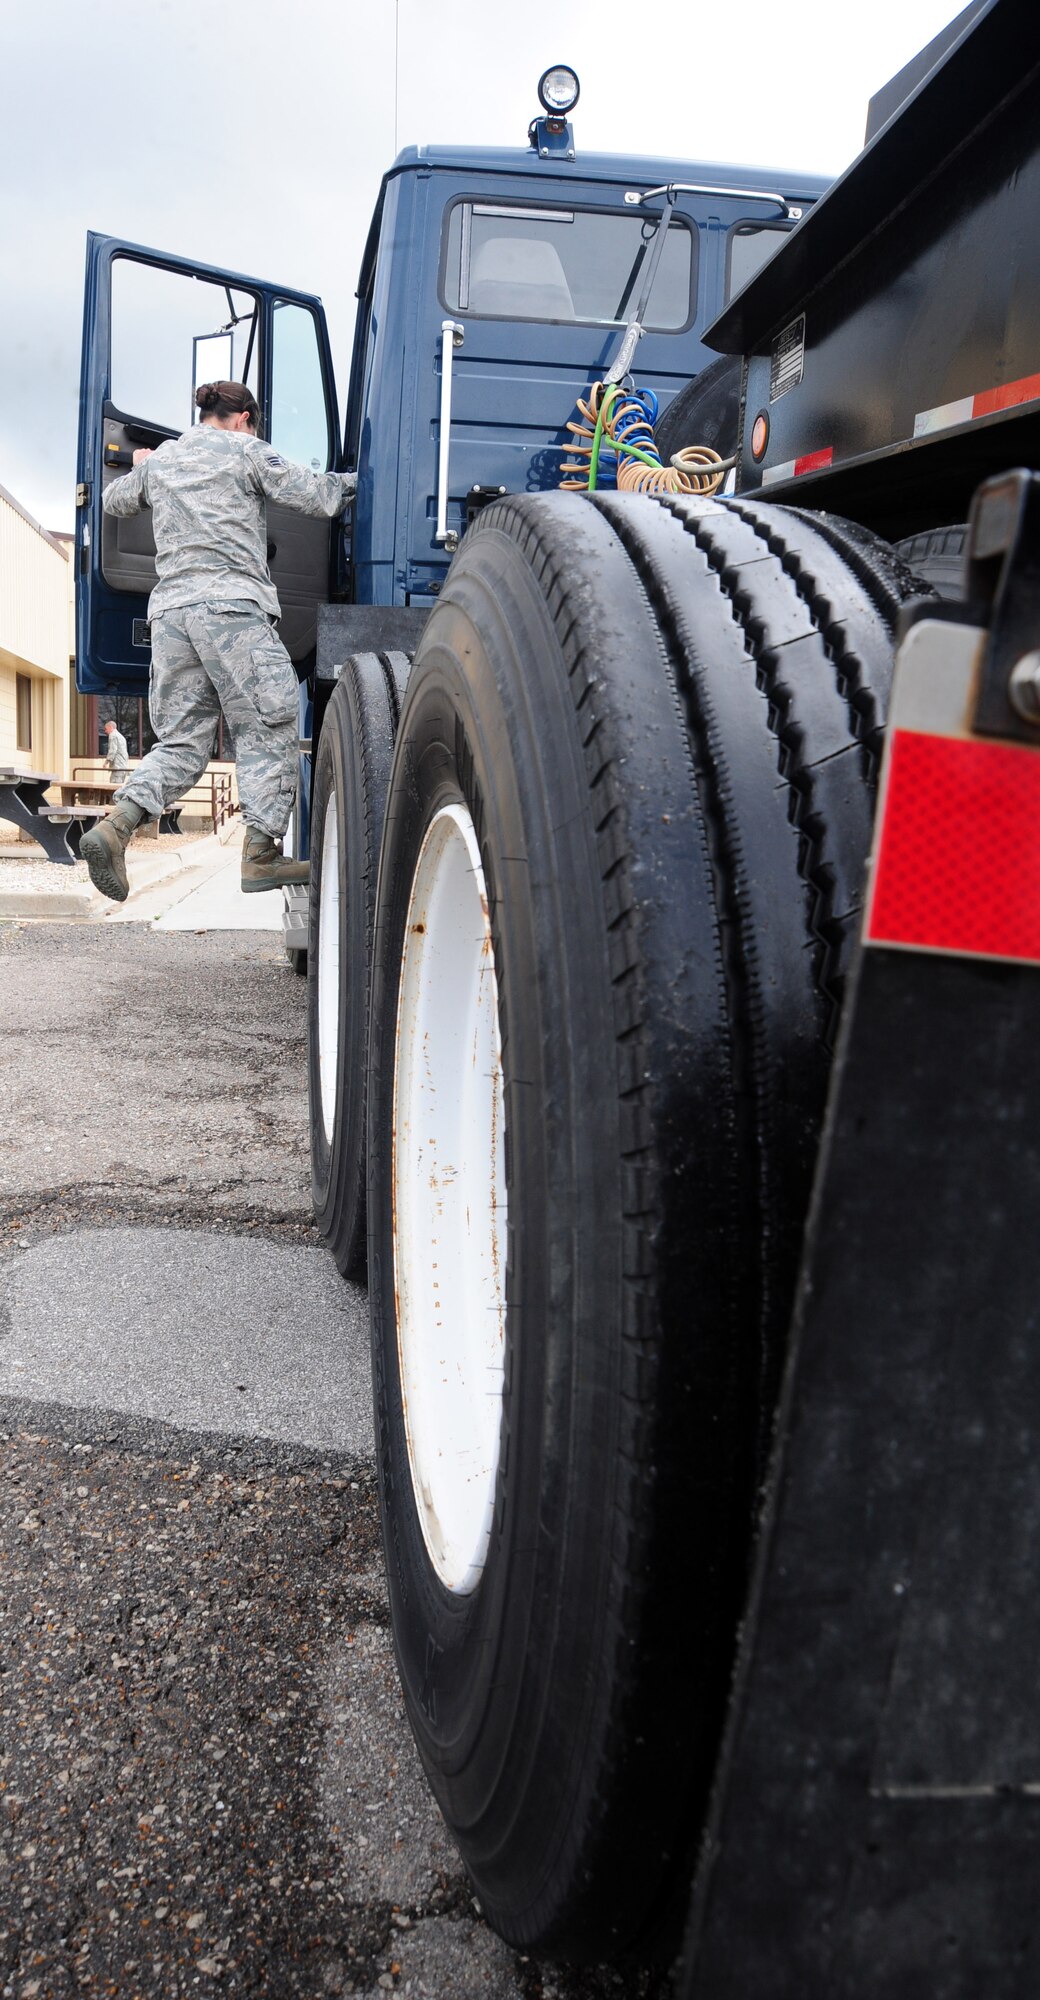 WHITEMAN AIR FORCE BASE, Mo. -- Senior Airman Stacy Schumpert, 509th Logistics Readiness Squadron operator records and licensing journeyman, inspects a ten-ton tractor March 23. Before, during and after trips, it’s important to inspect the vehicles for any damages to ensure the reliability of the vehicle and safety of the members driving it. (U.S. Air Force photo/Senior Airman Nick Wilson)